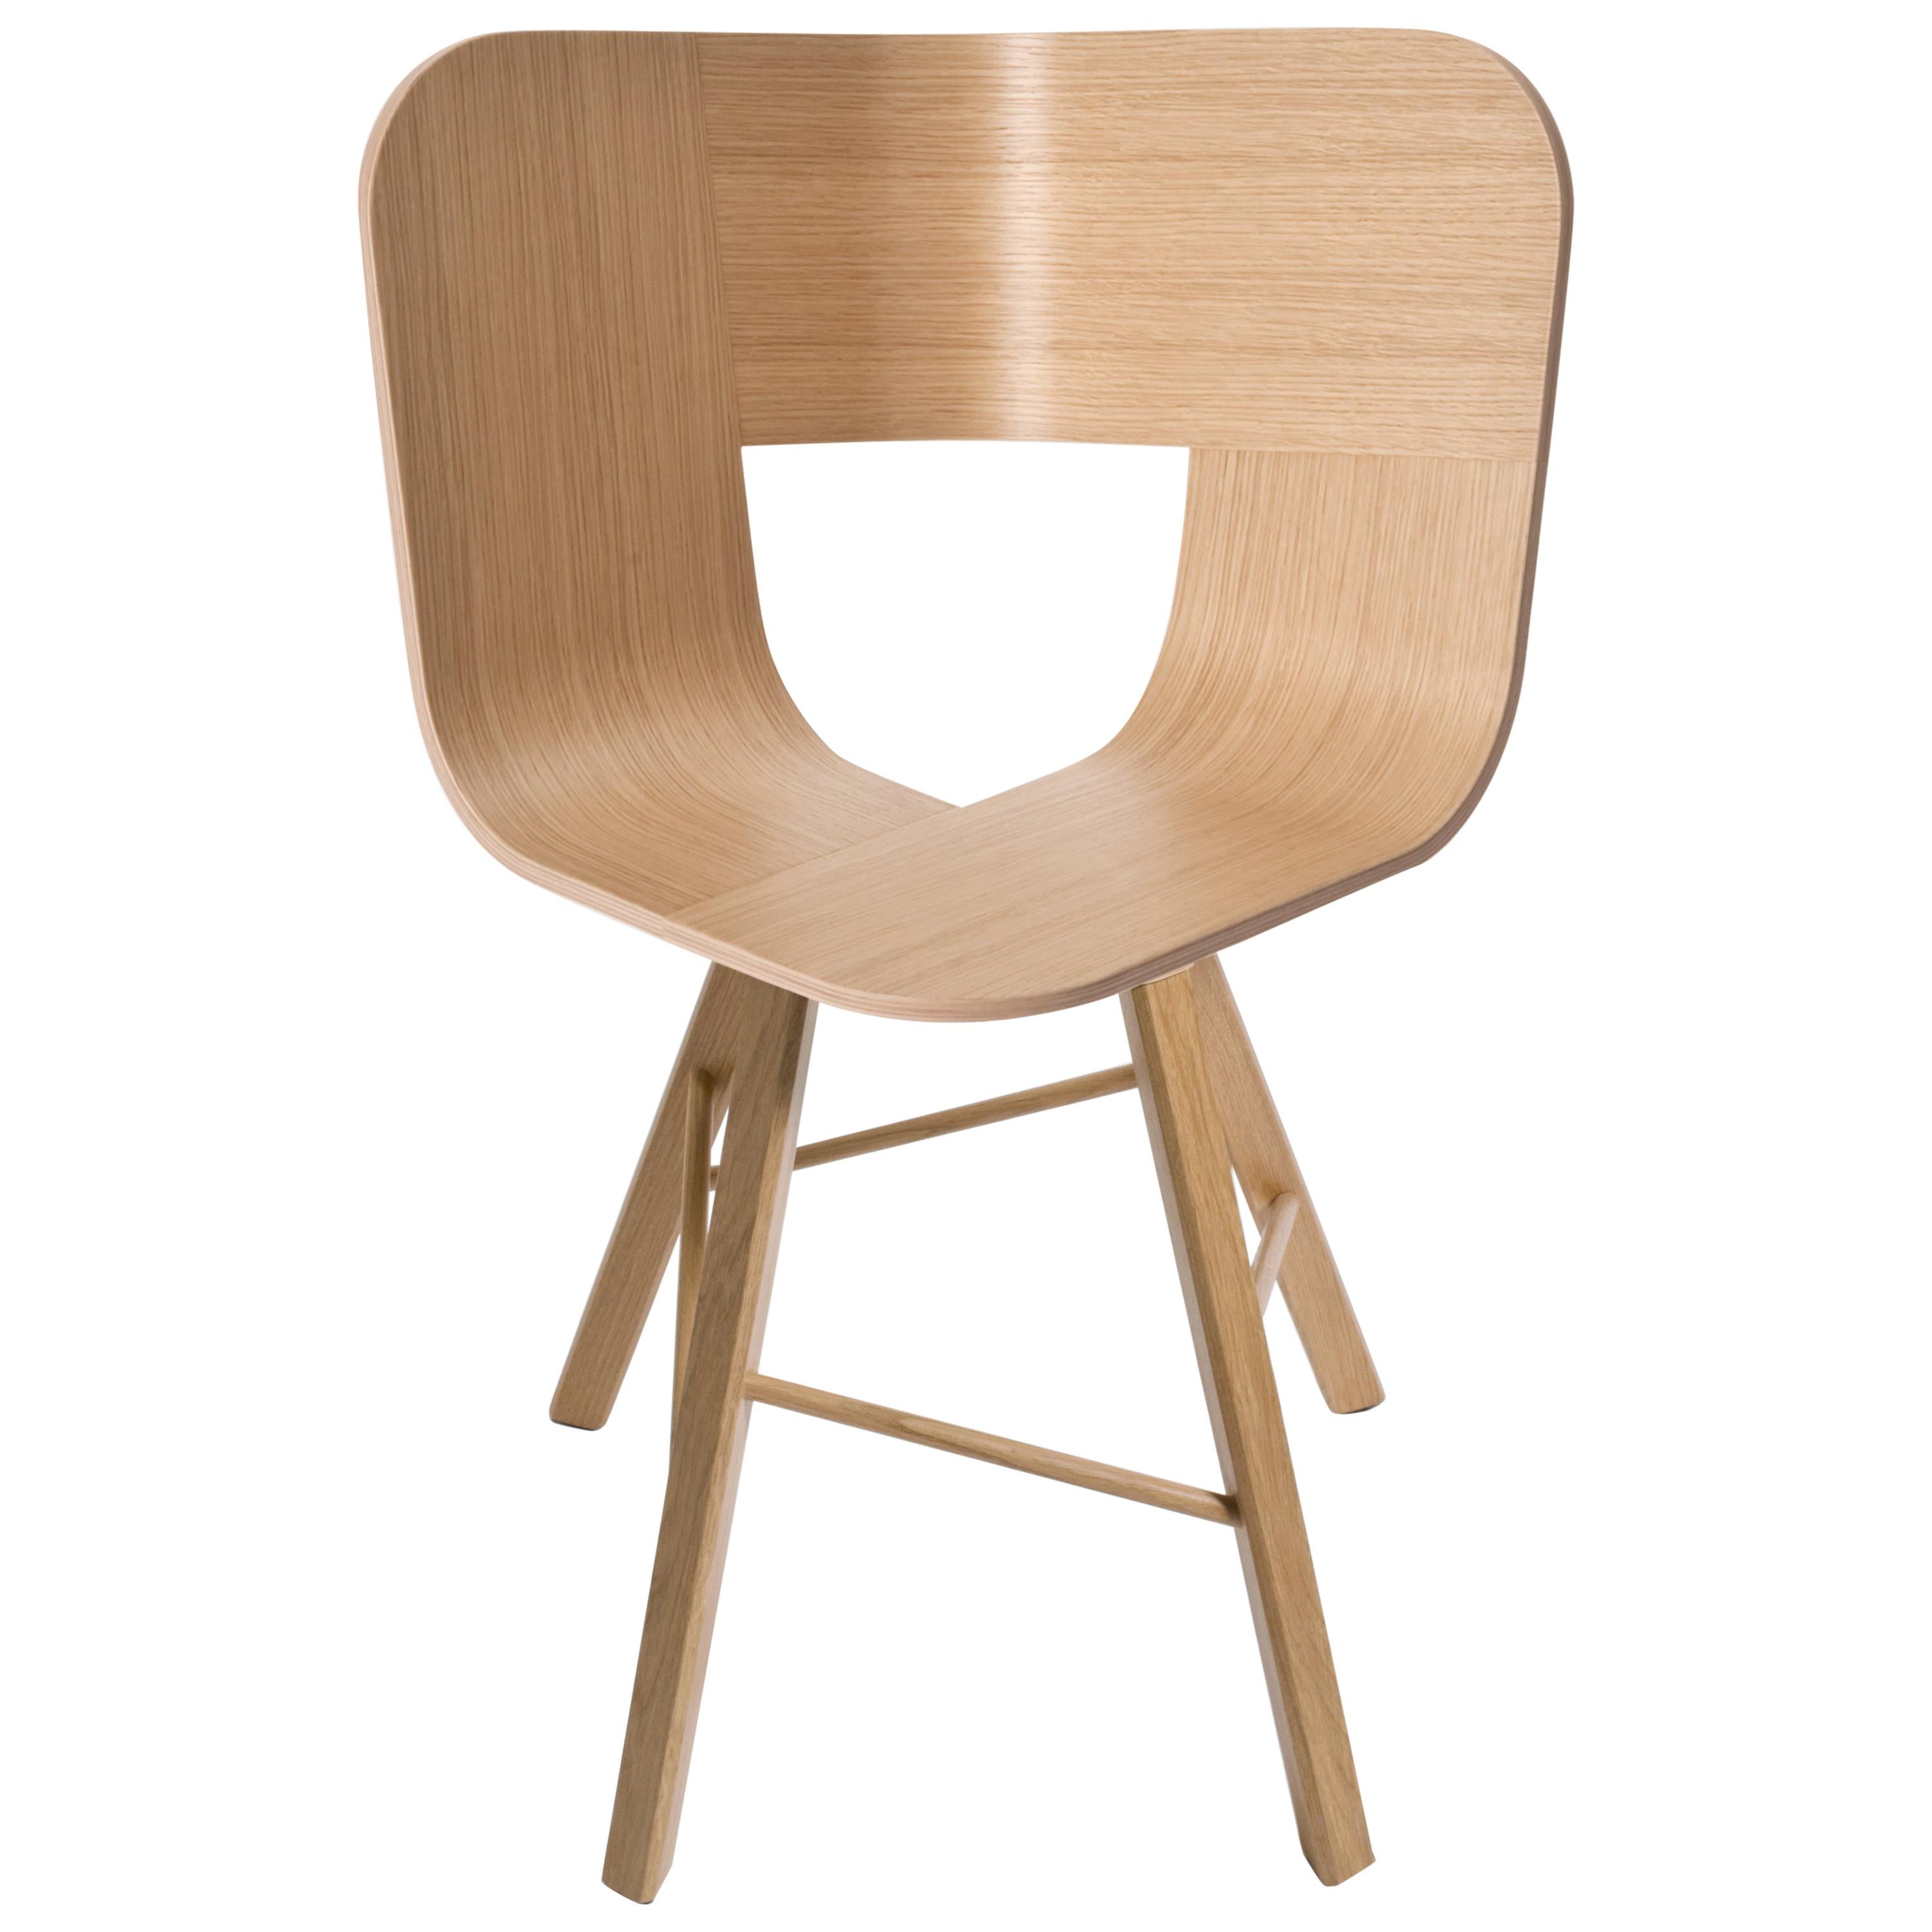 Tria Wood Chair, Natural Oak, Design Icon Inspired to Graphic Art